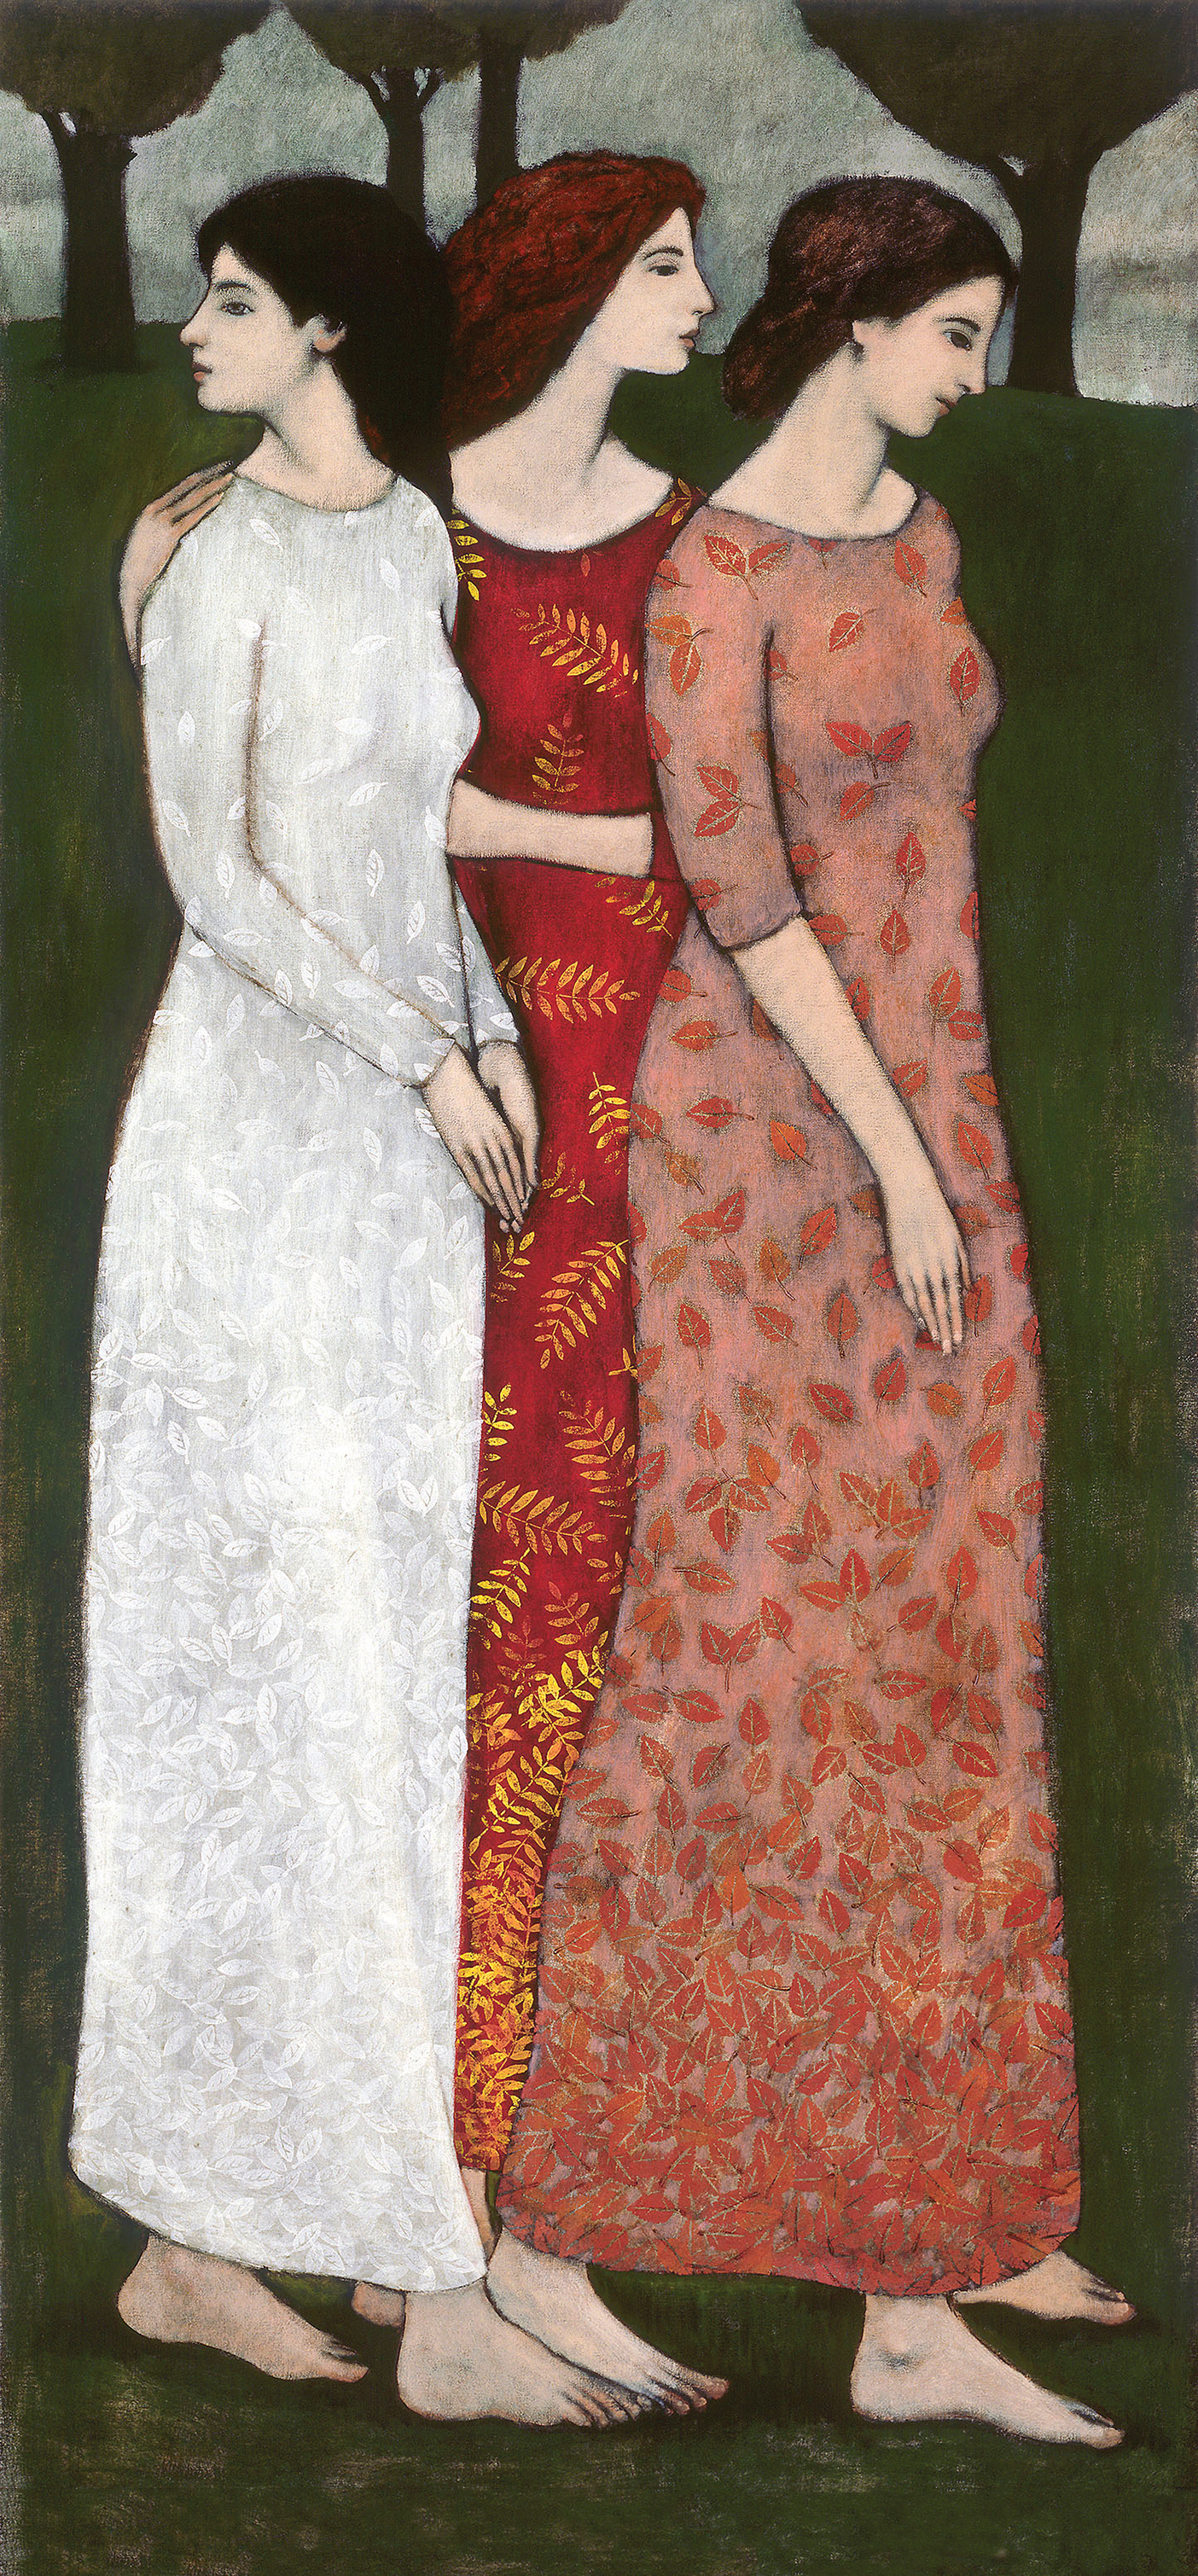 A painting of three women standing next to each other.